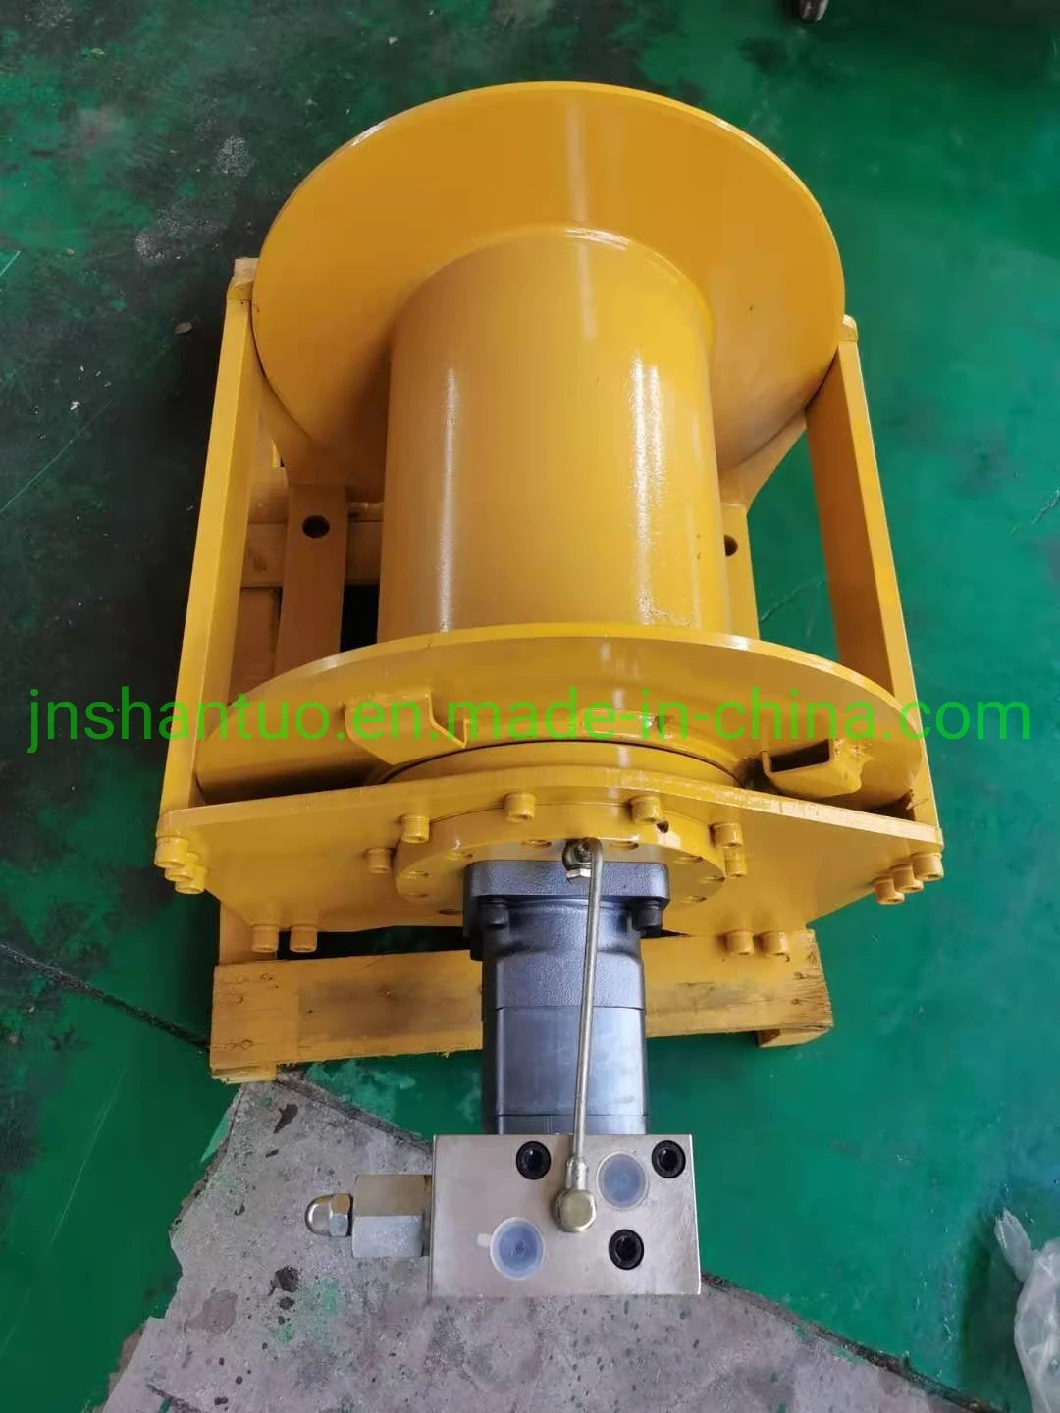 Forestry Hoisting Winches, Excavator Conversion, Agricultural Machinery Conversion 4 Ton, 5 Ton Hydraulic Winch